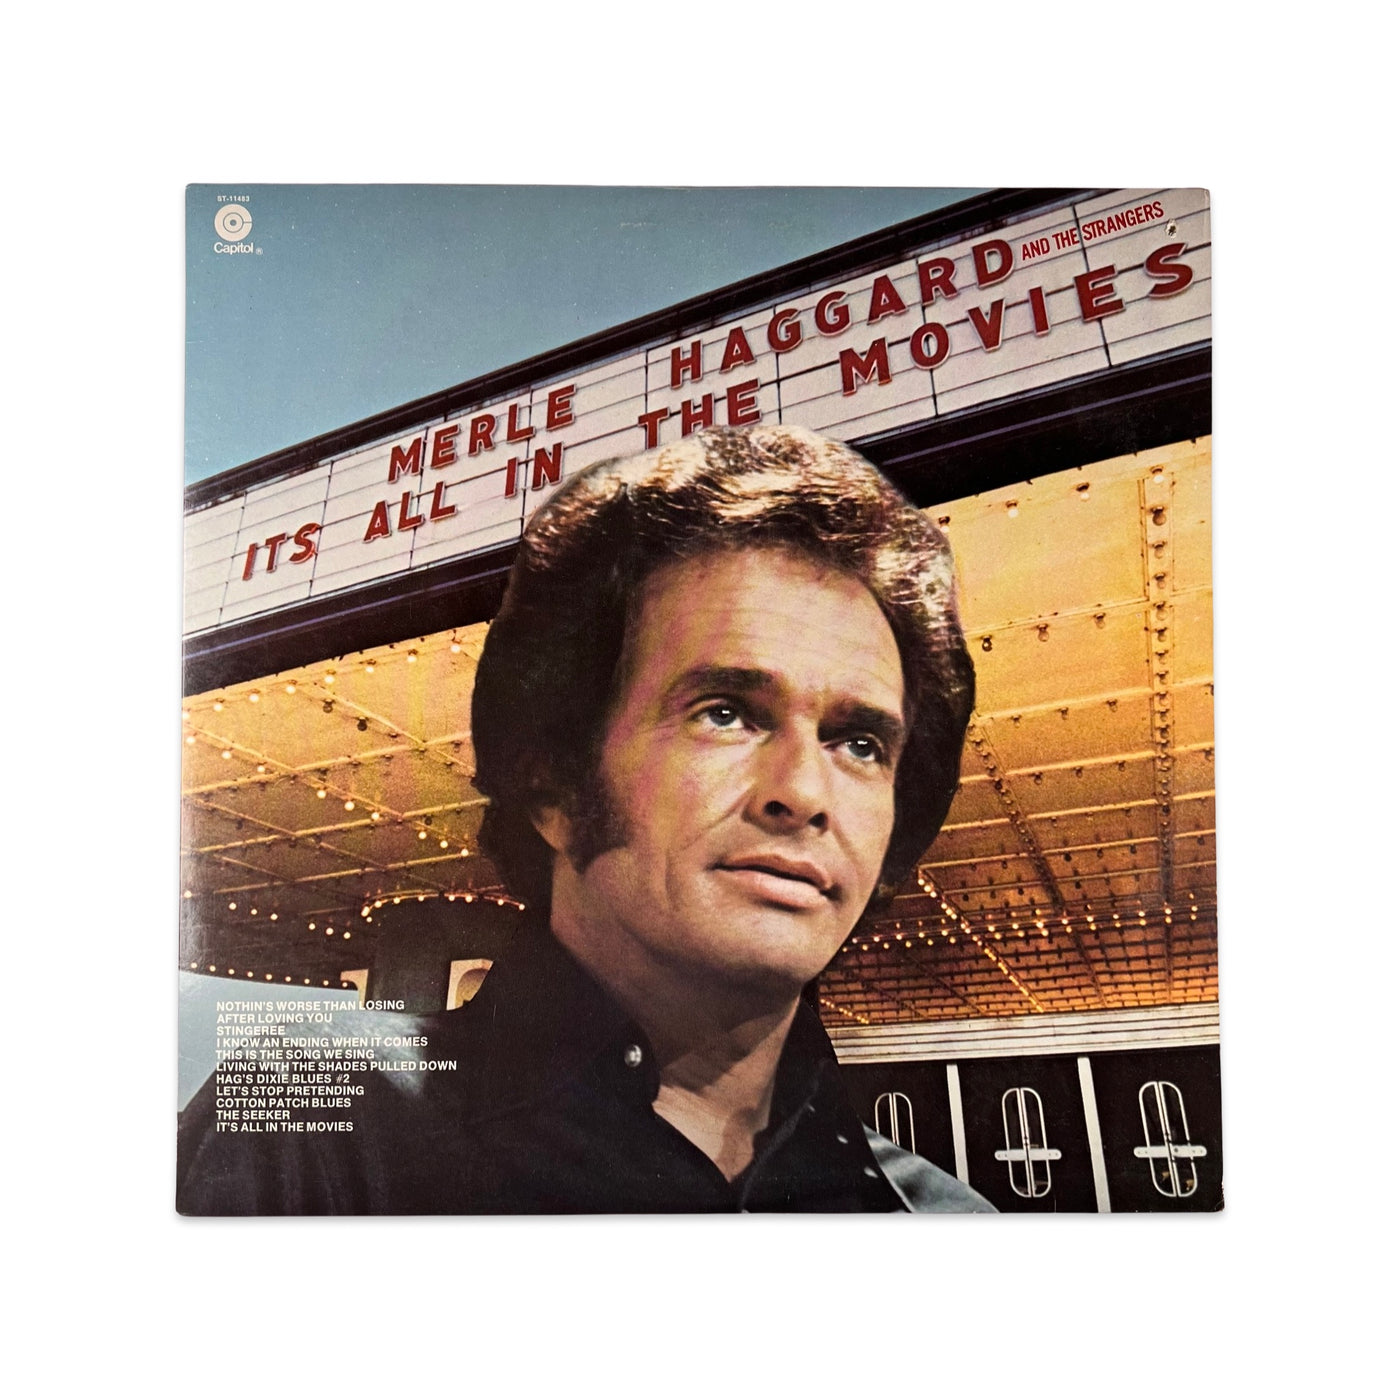 Merle Haggard And The Strangers – It's All In The Movies